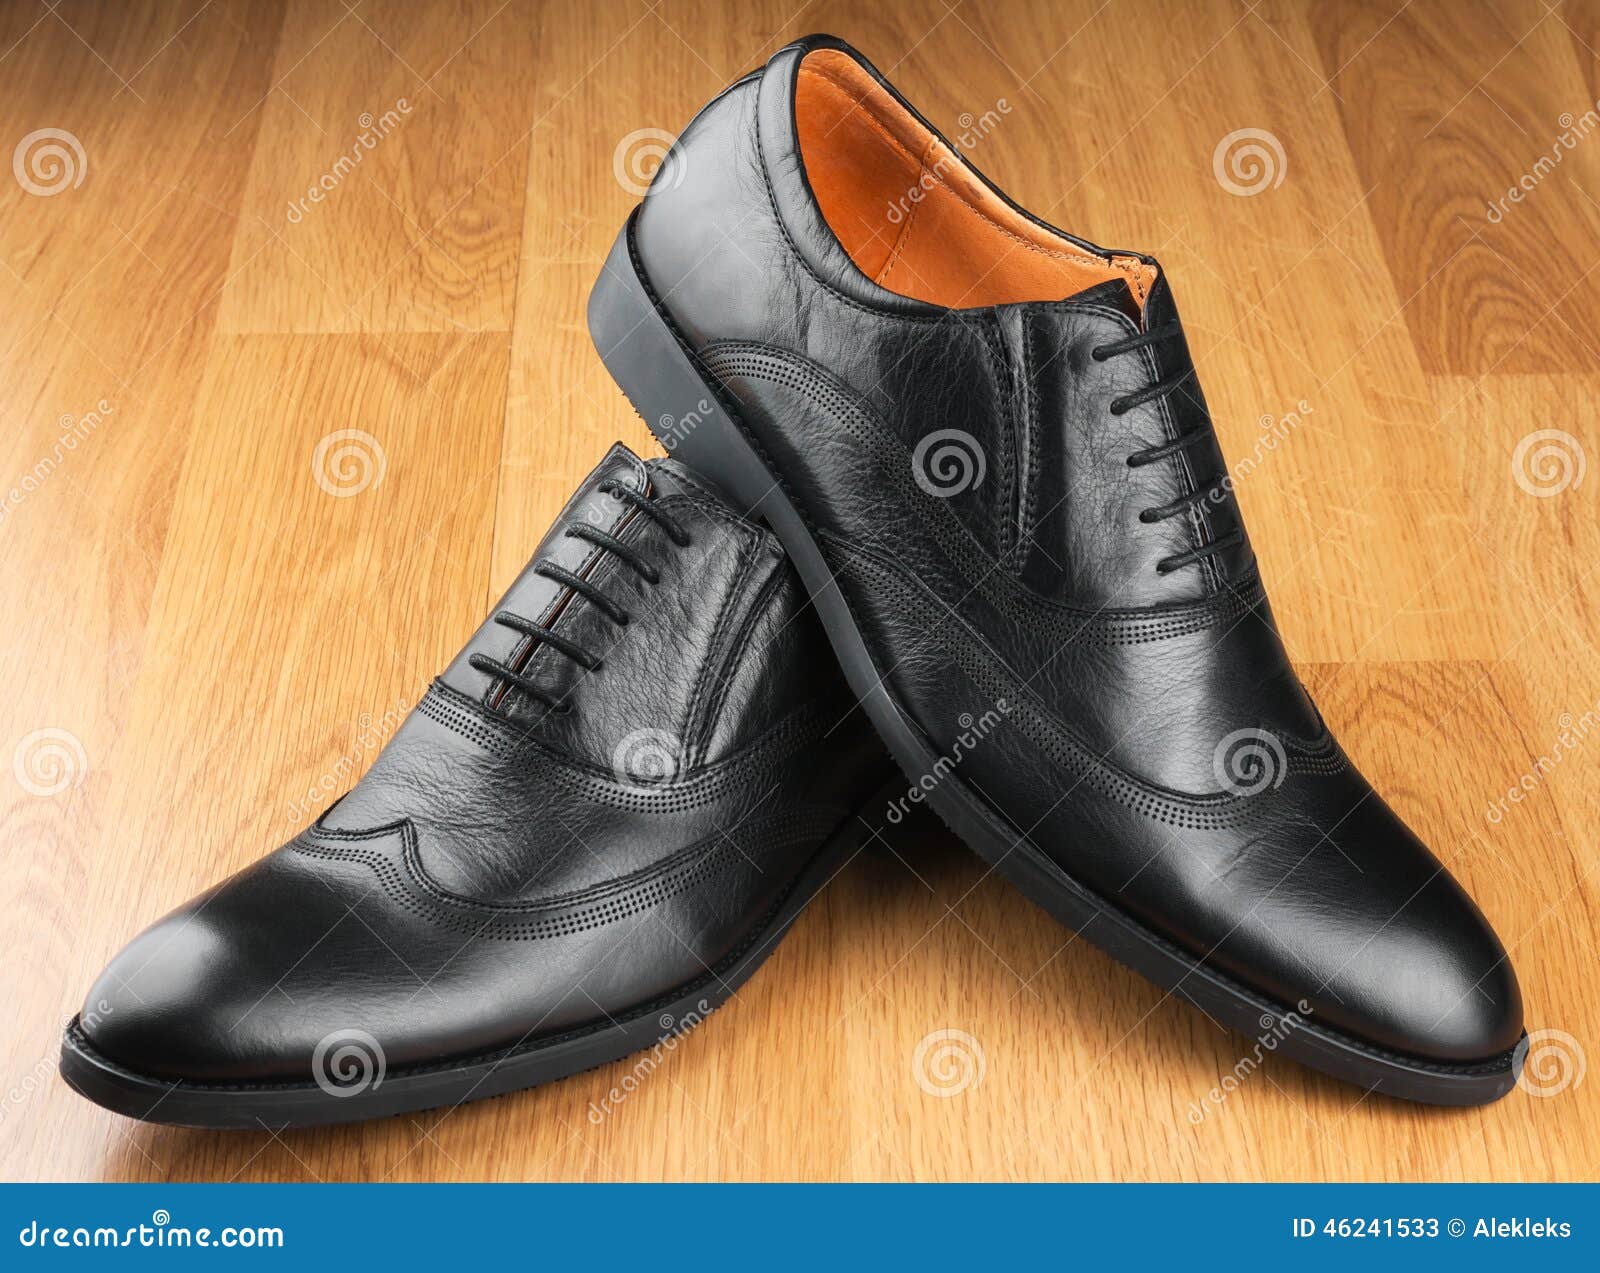 Classic Men S Shoes Stand on the Wooden Floor Stock Image - Image of ...